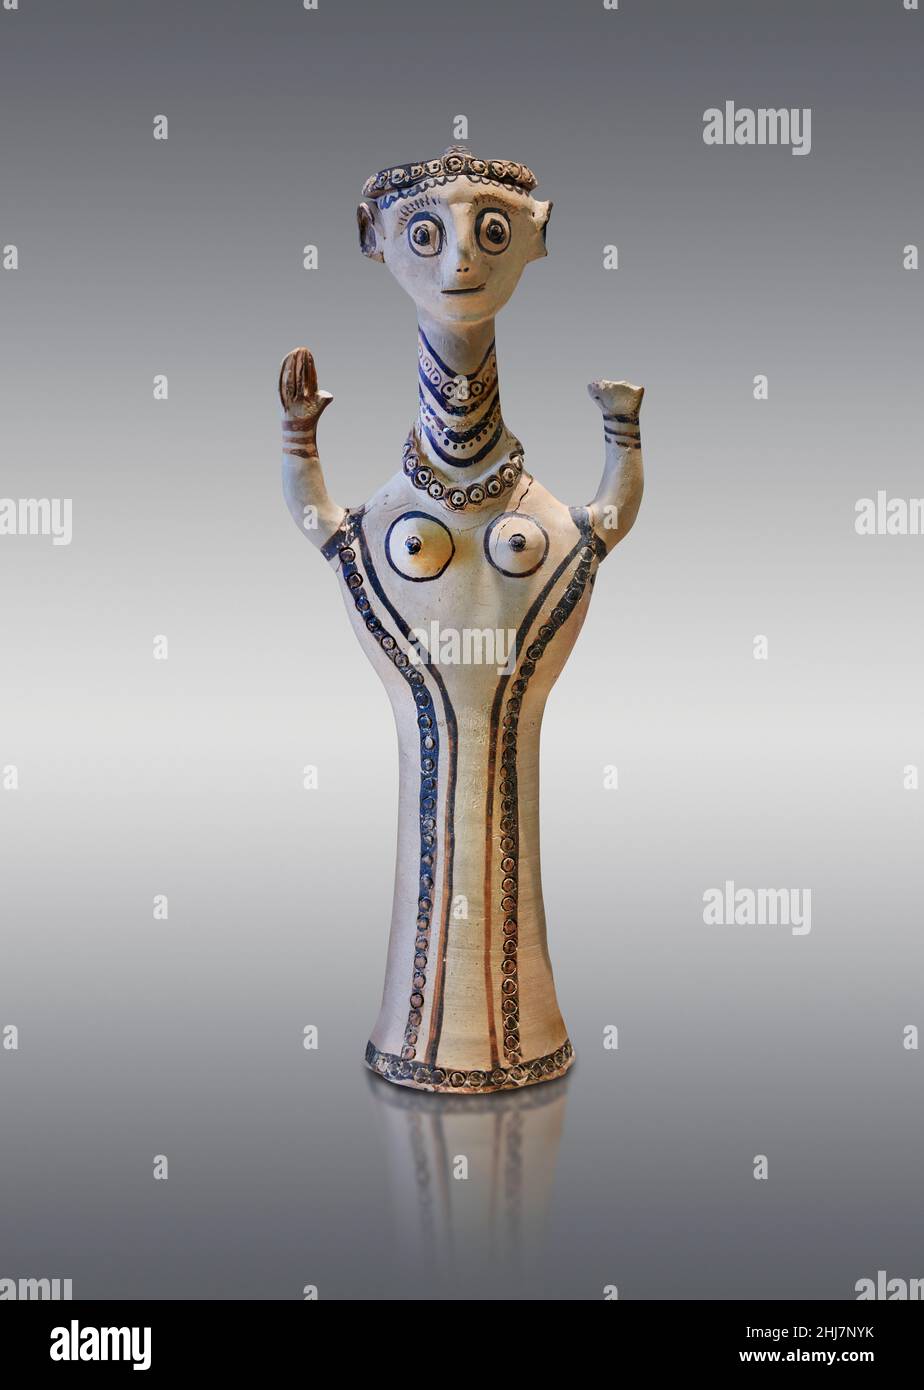 Mycenaean pottery figurine statuette of a goddess made on a pottery wheel, Tiryns Lower Citadel, 12th cent BC. : Against grey background. Photographer Stock Photo